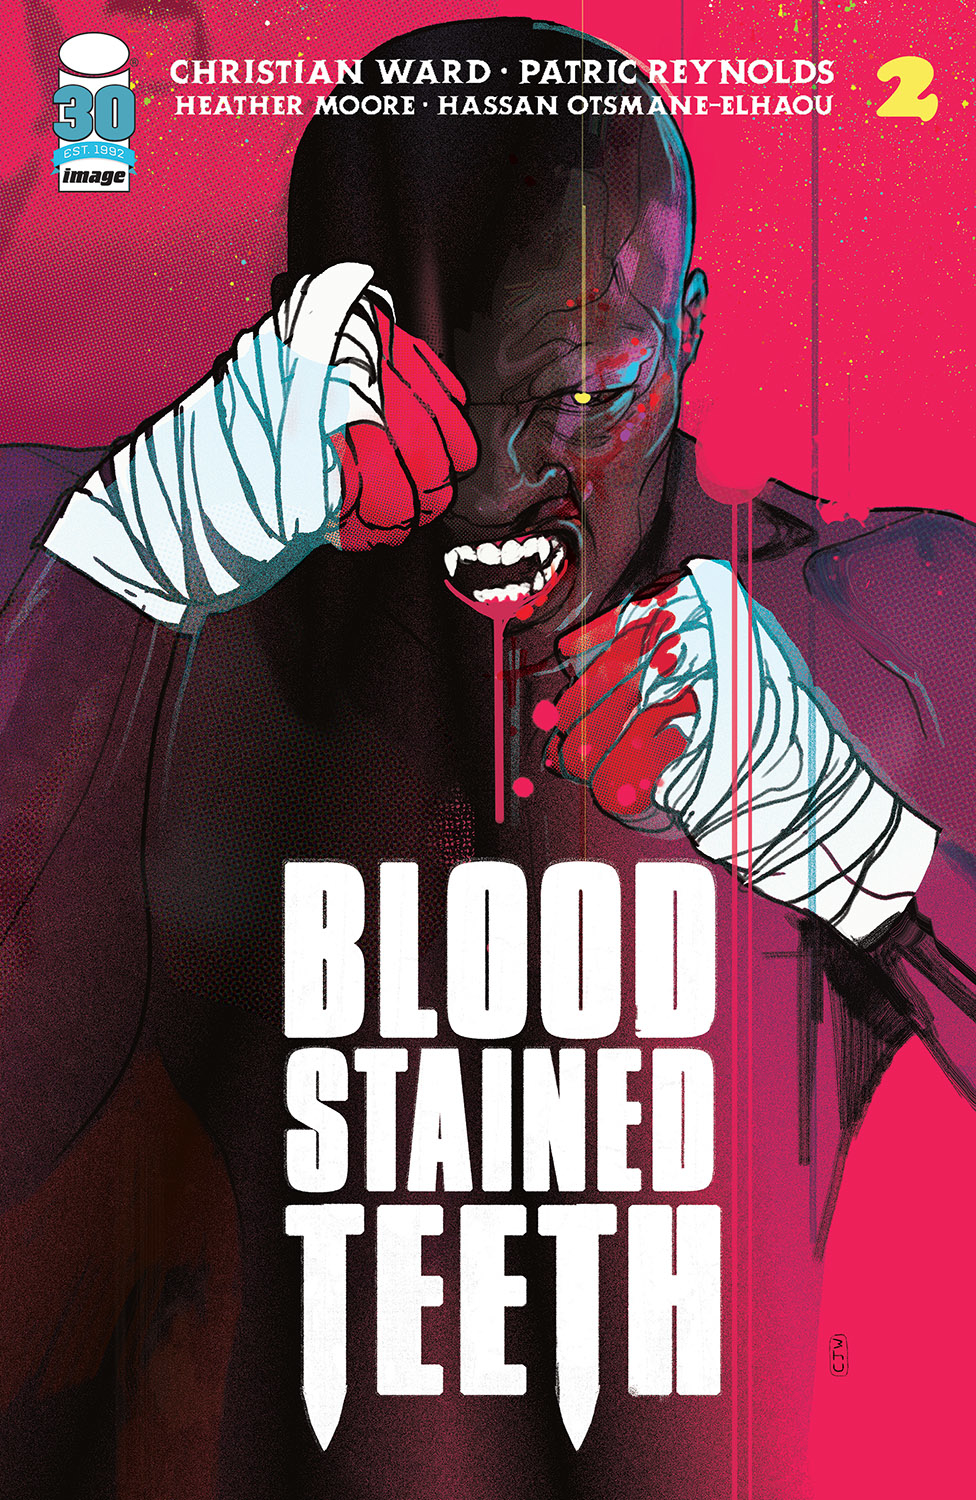 Blood-Stained Teeth #2 Cover A Ward (Mature)